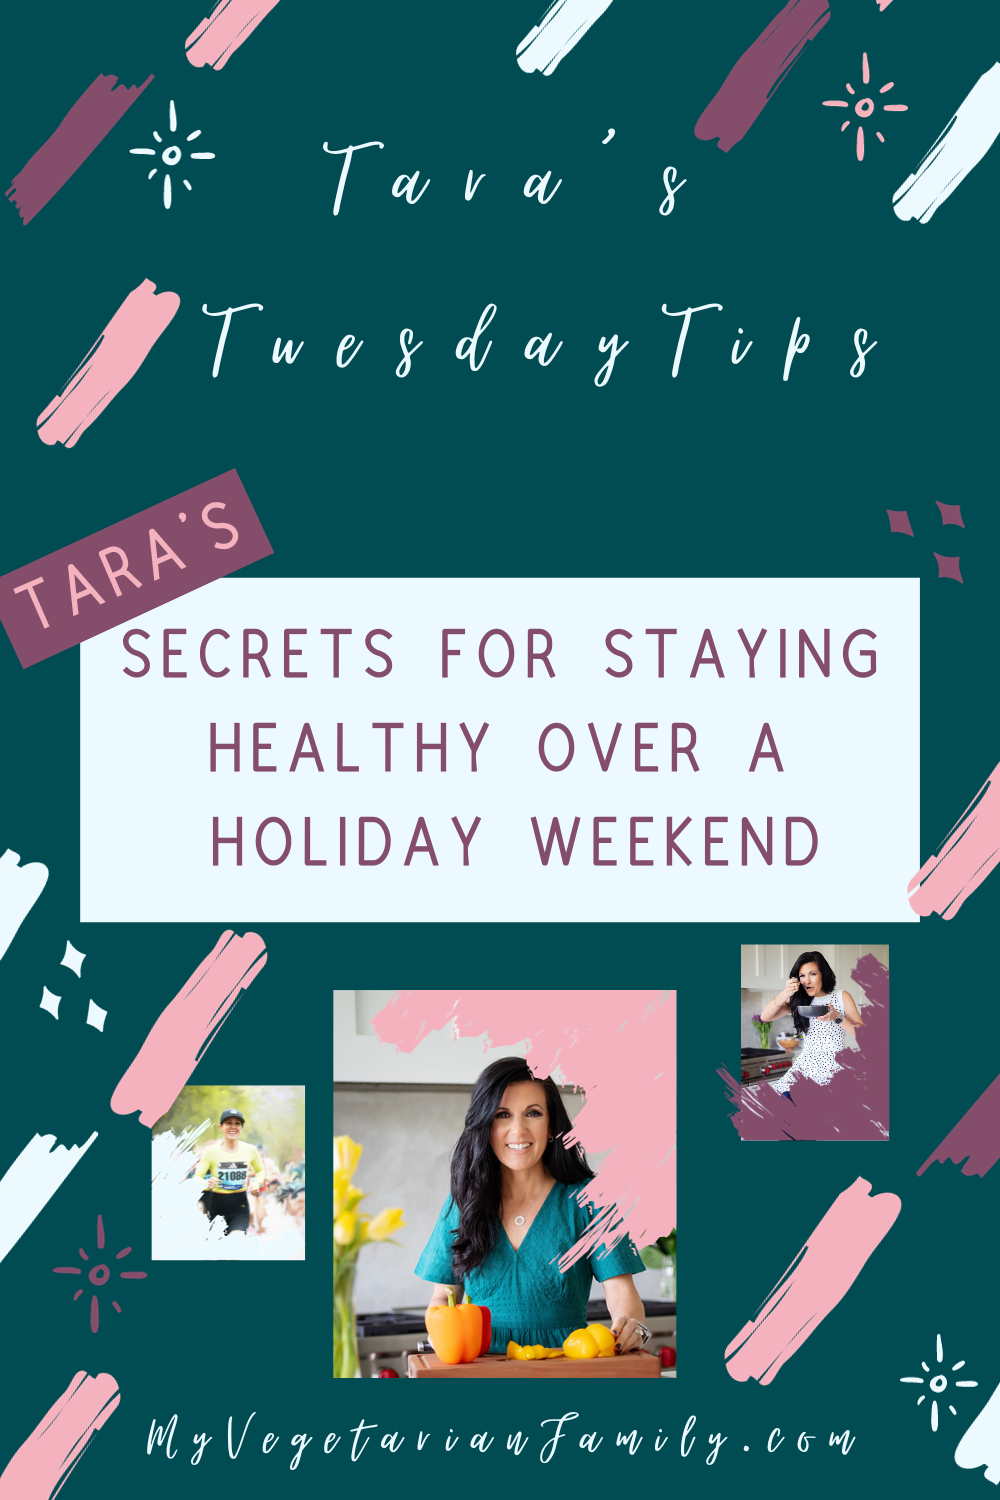 Secrets For Staying Healthy Over a Holiday Weekend | My Vegetarian Family | Tara's Tuesday Tips #healthyholidaysecrets